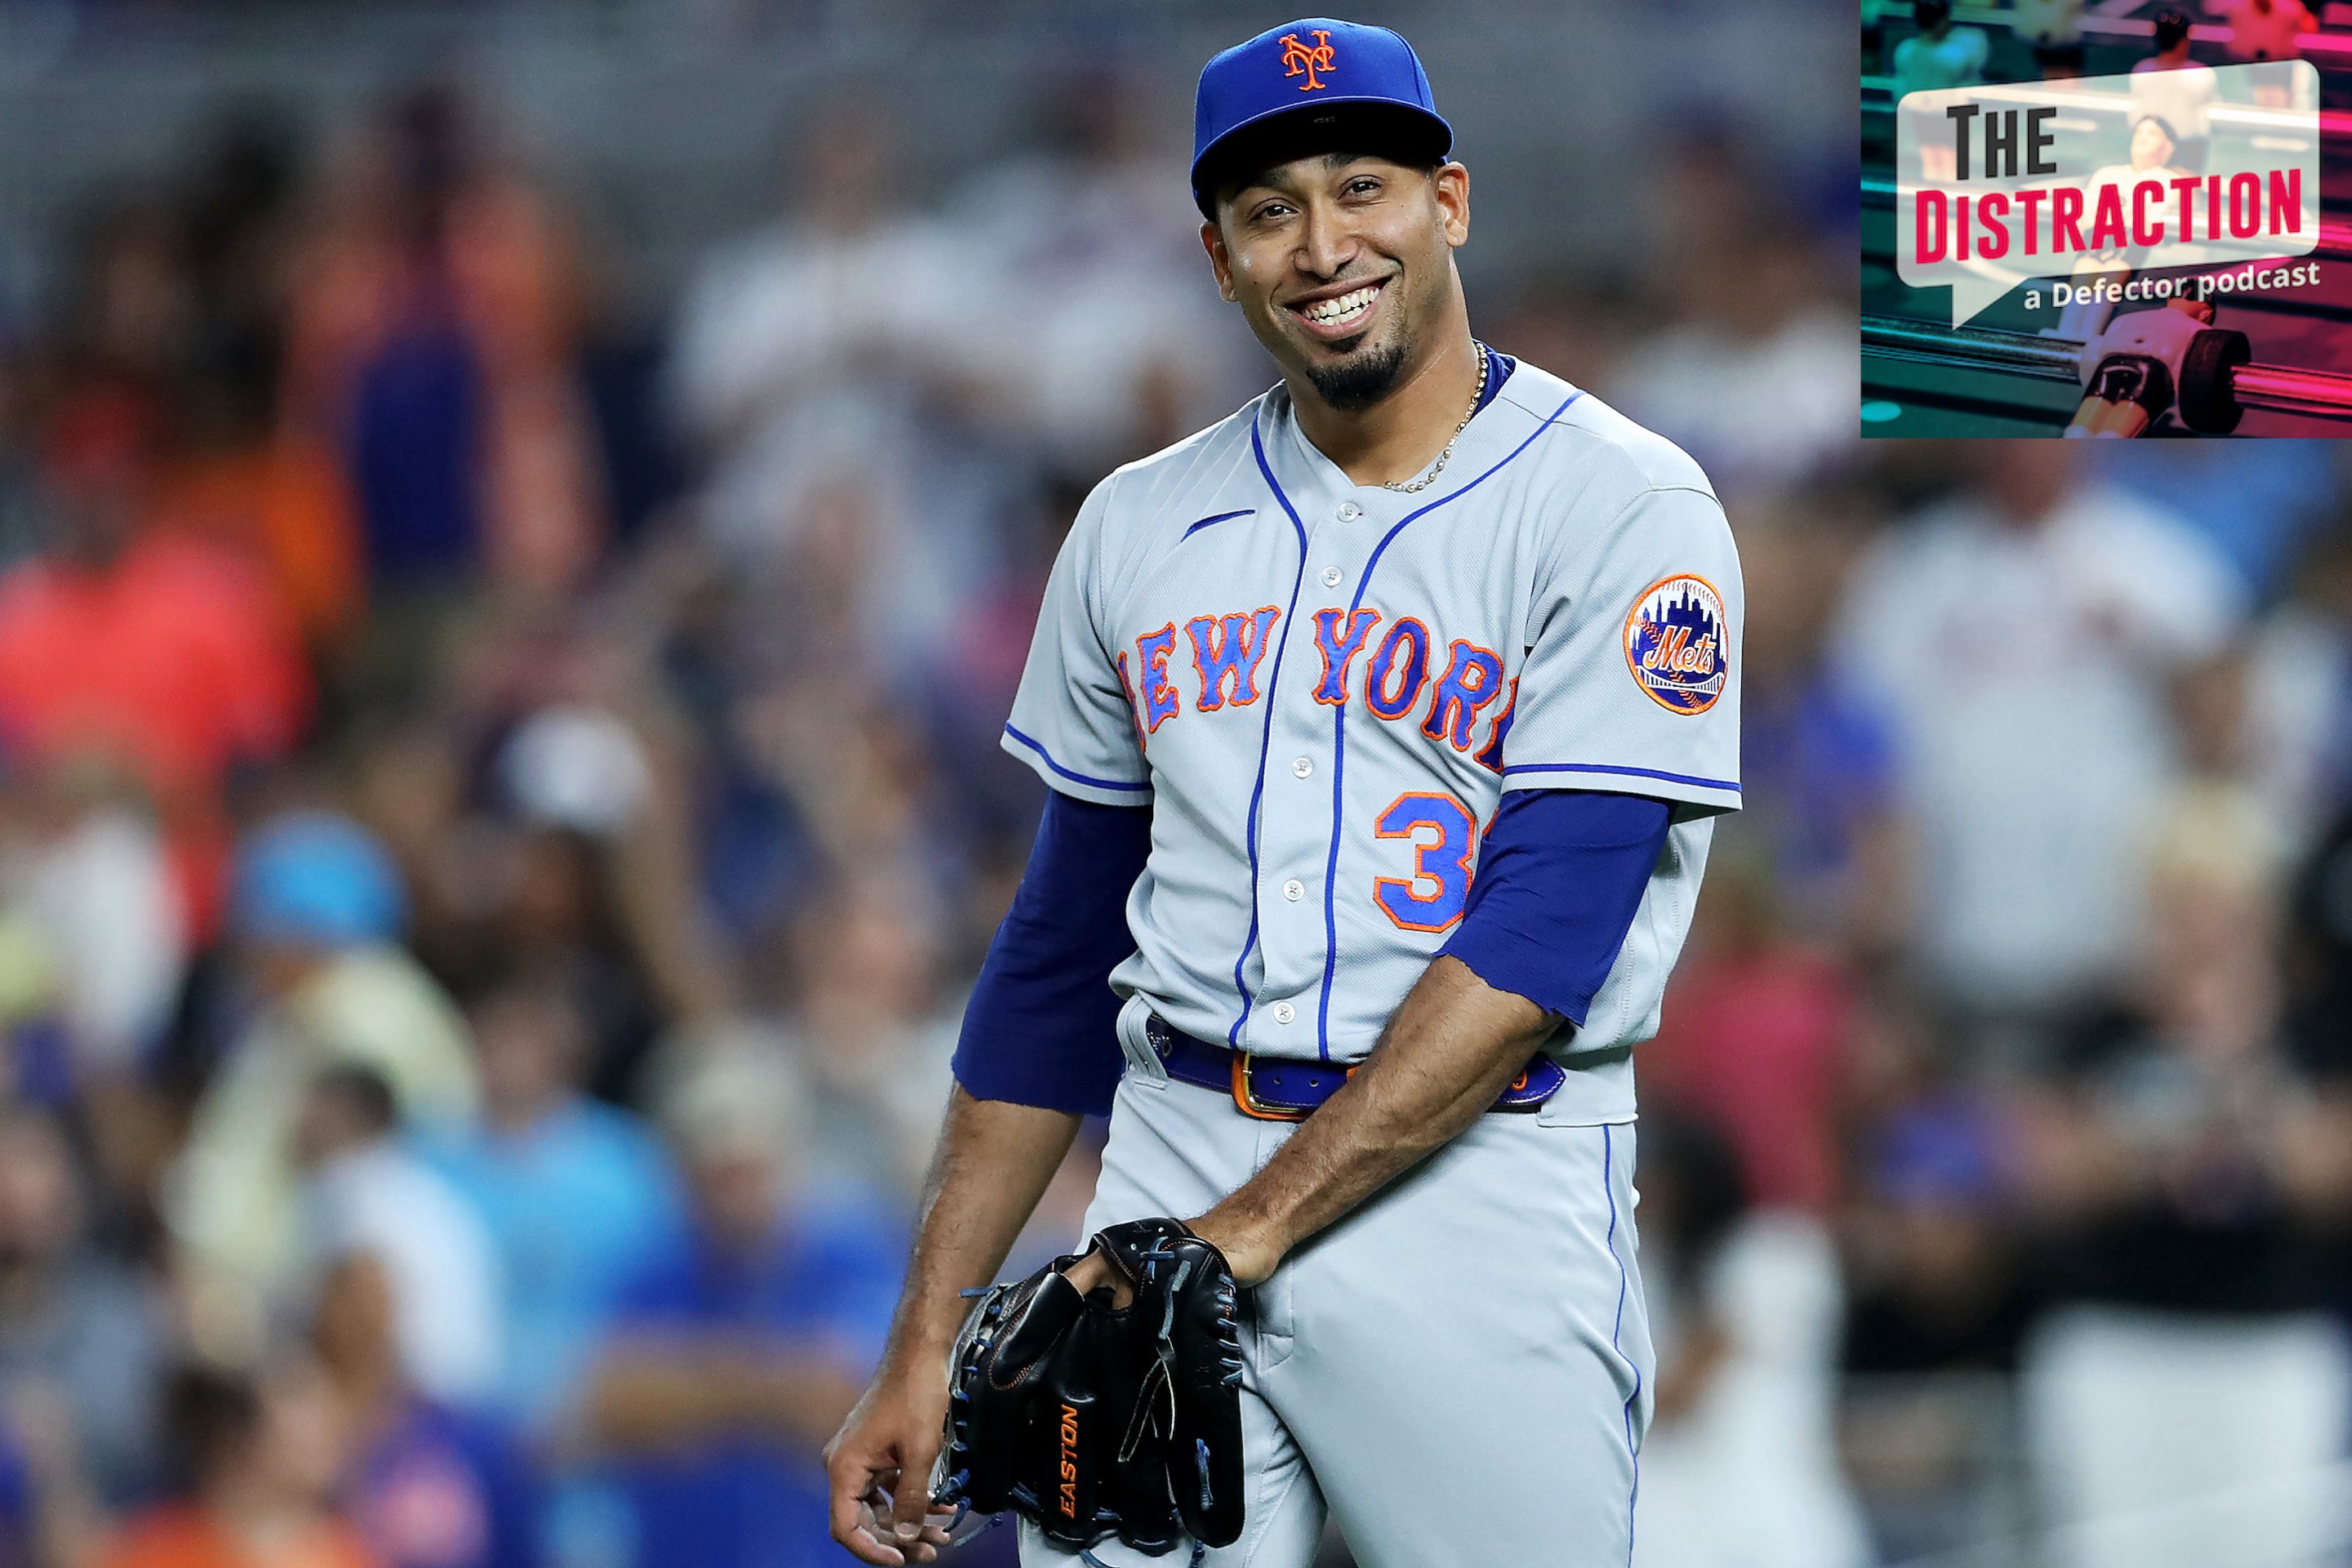 Mets closer Edwin Diaz, smiling on the mound during a save against the Marlins in July of 2022.